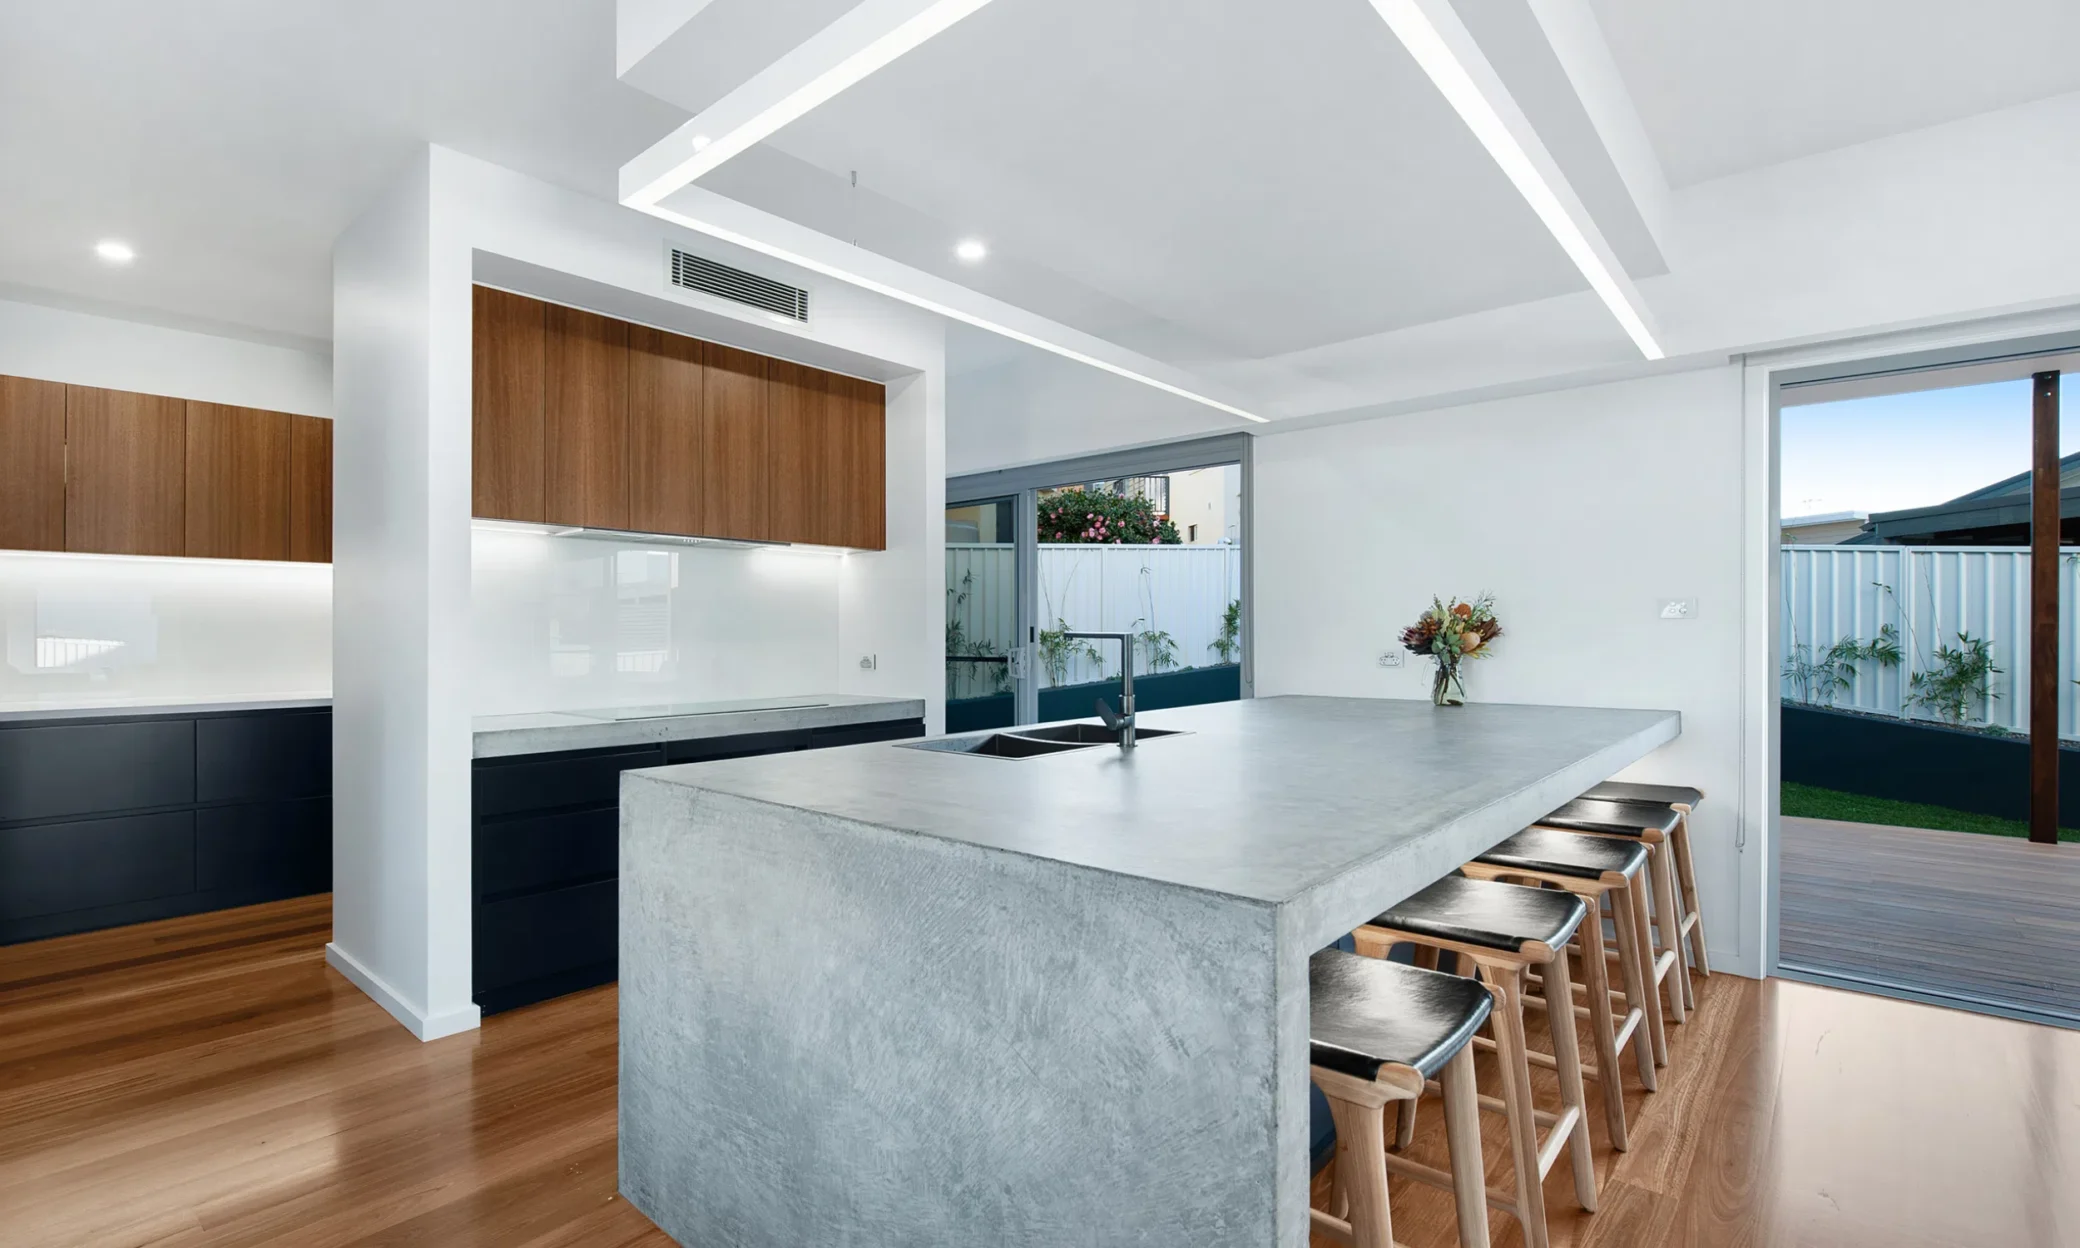 Modern kitchen interior featuring a large concrete island with bar stools, sleek wood cabinetry, and integrated appliances. The custom-built space opens to a scenic outdoor area through glass sliding doors, enhancing natural light.